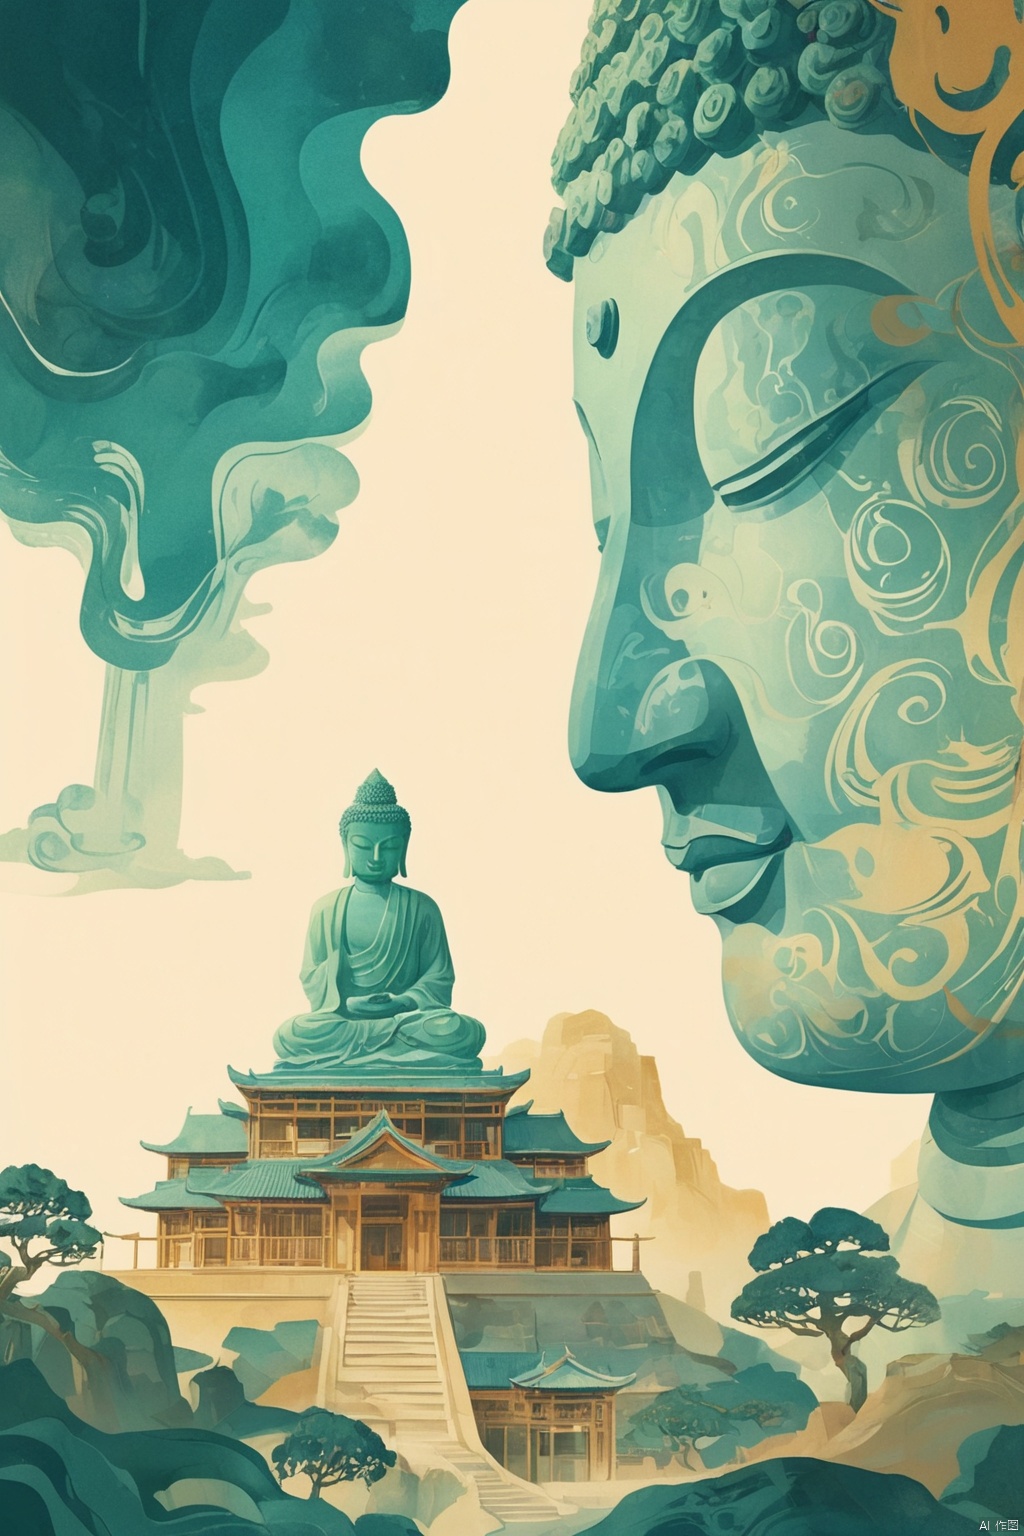  Buddha, architecture, ancient Temple, （double exposure：1.3）, flat illustration, Oriental aesthetics, Dunhuang art style